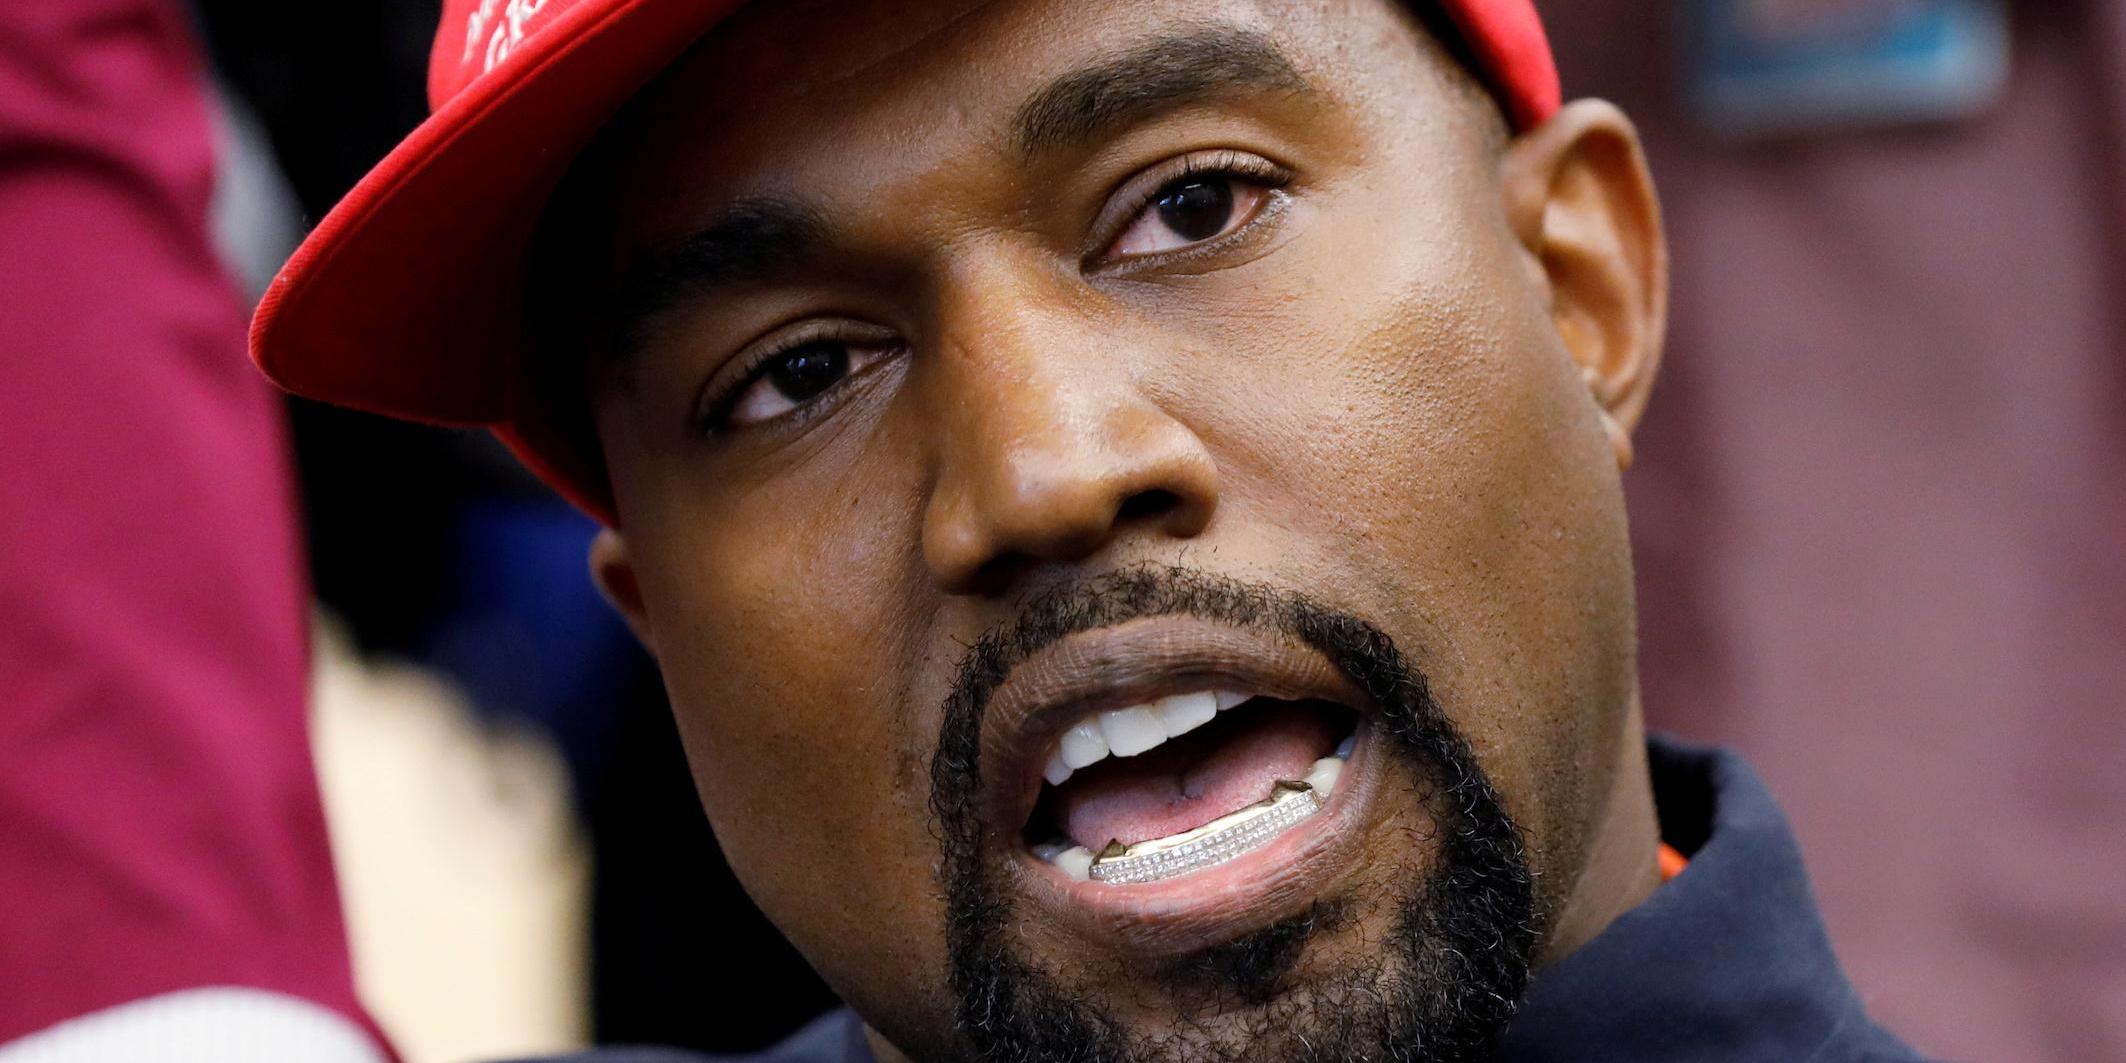 Kanye West sued by Donna Summer’s estate over use of ‘I Feel Love’